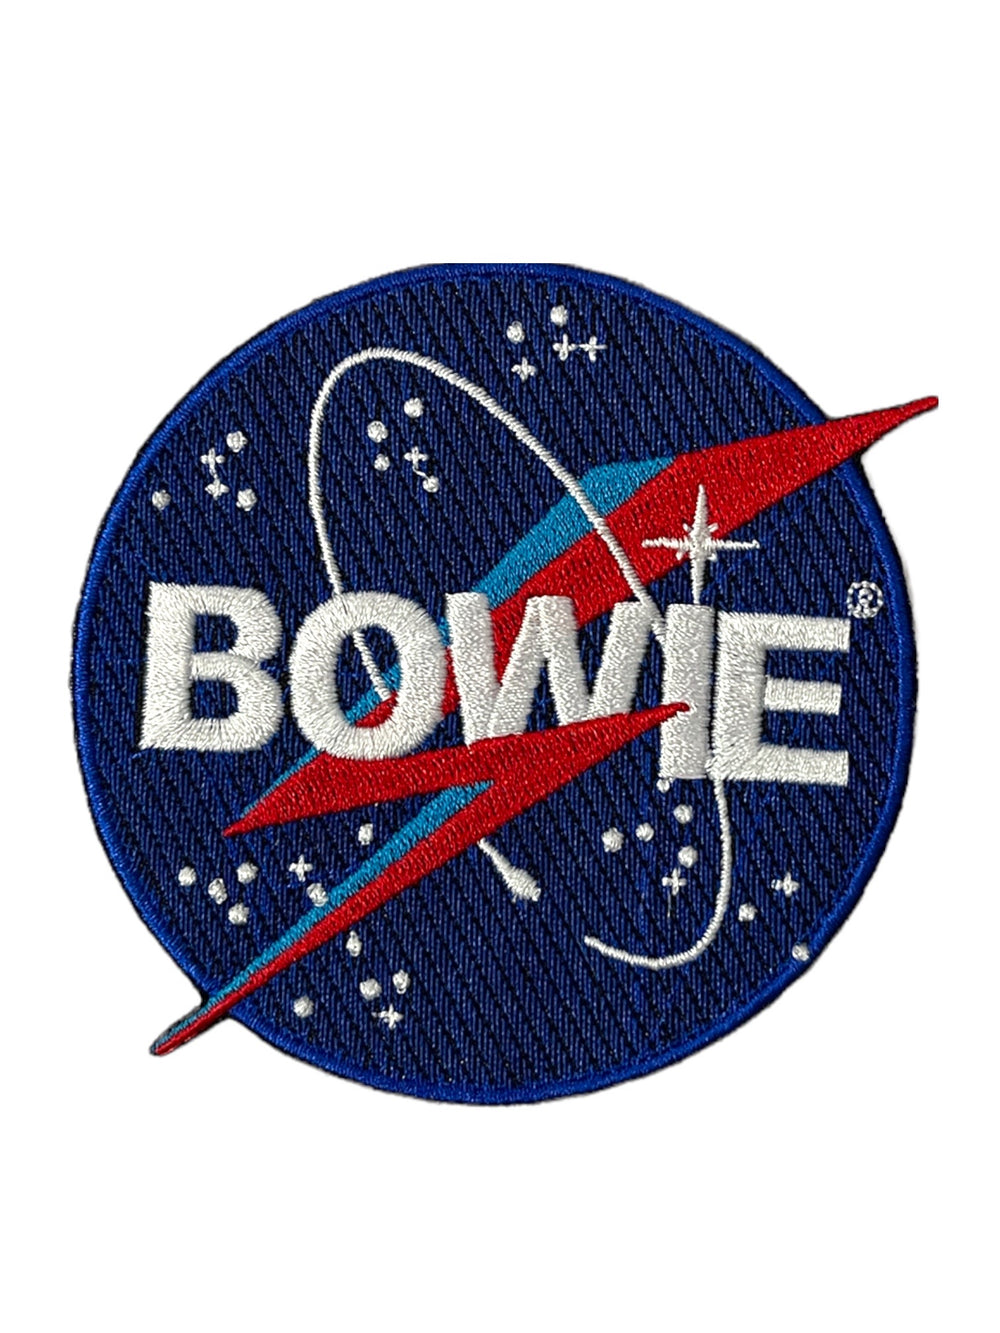 David Bowie NASA Patch Official Woven Patch Brand New Official